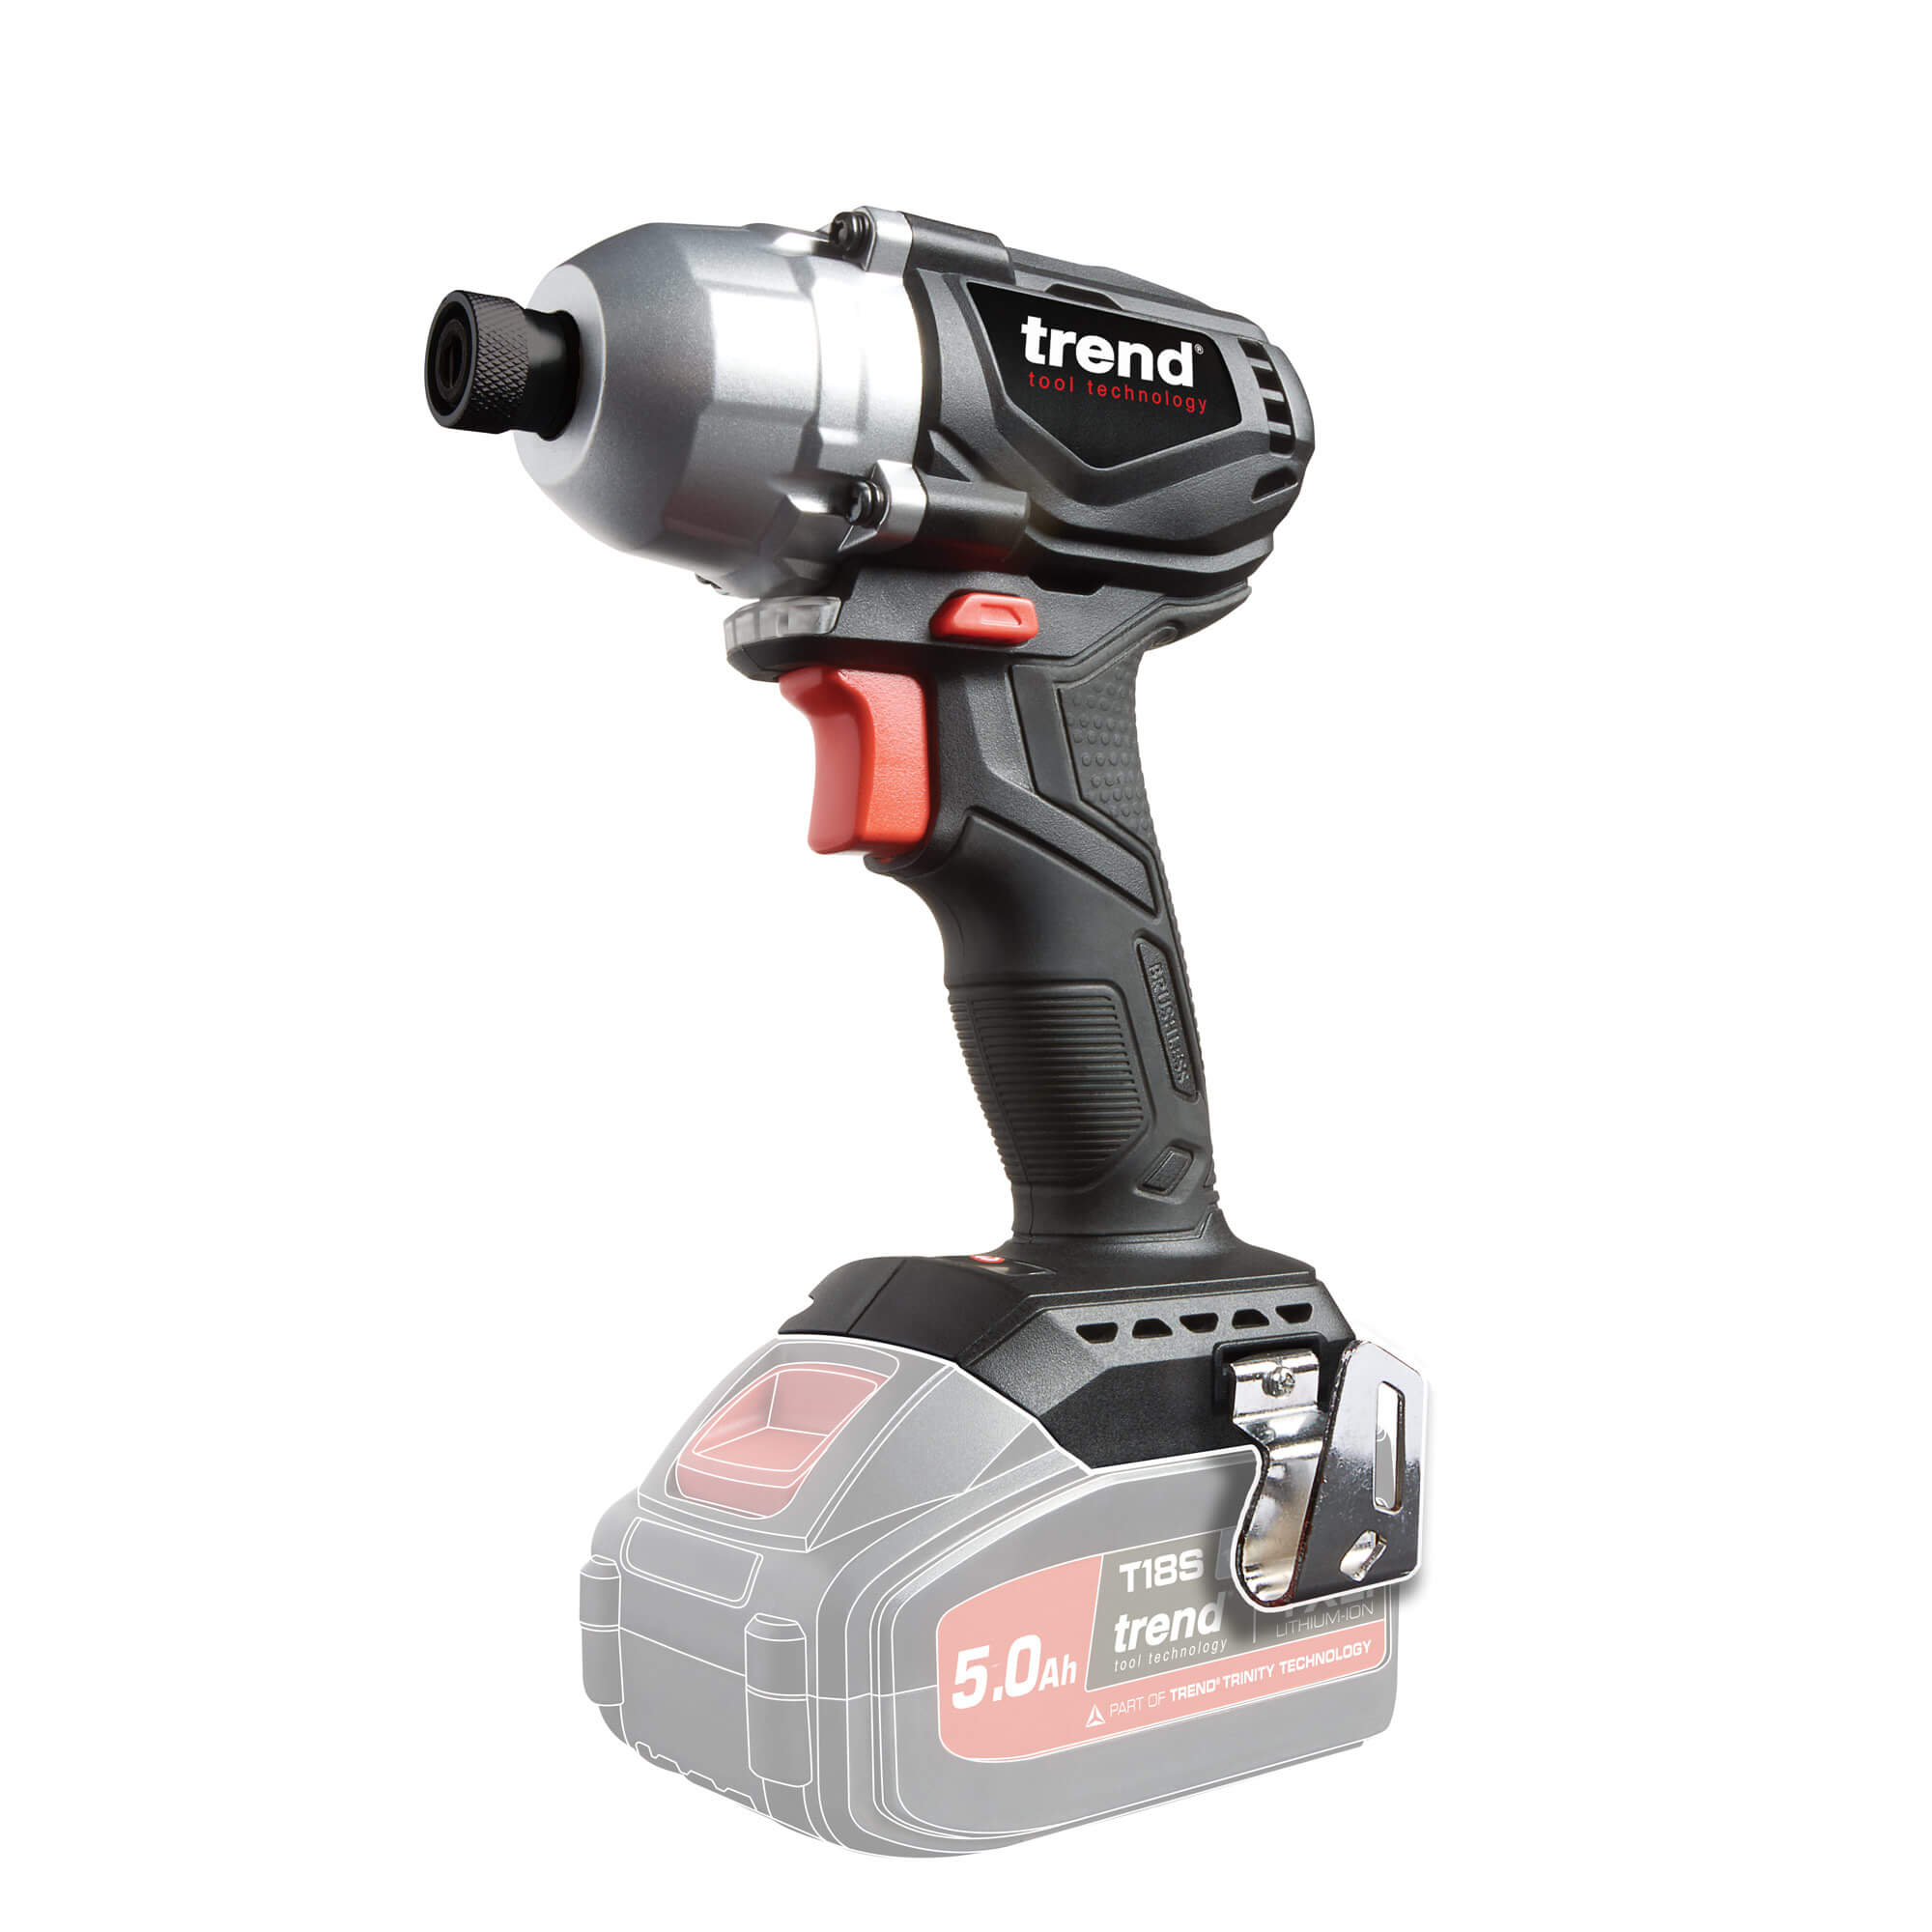 Image of Trend T18S/IDB 18v Cordless Brushless Impact Driver No Batteries No Charger No Case